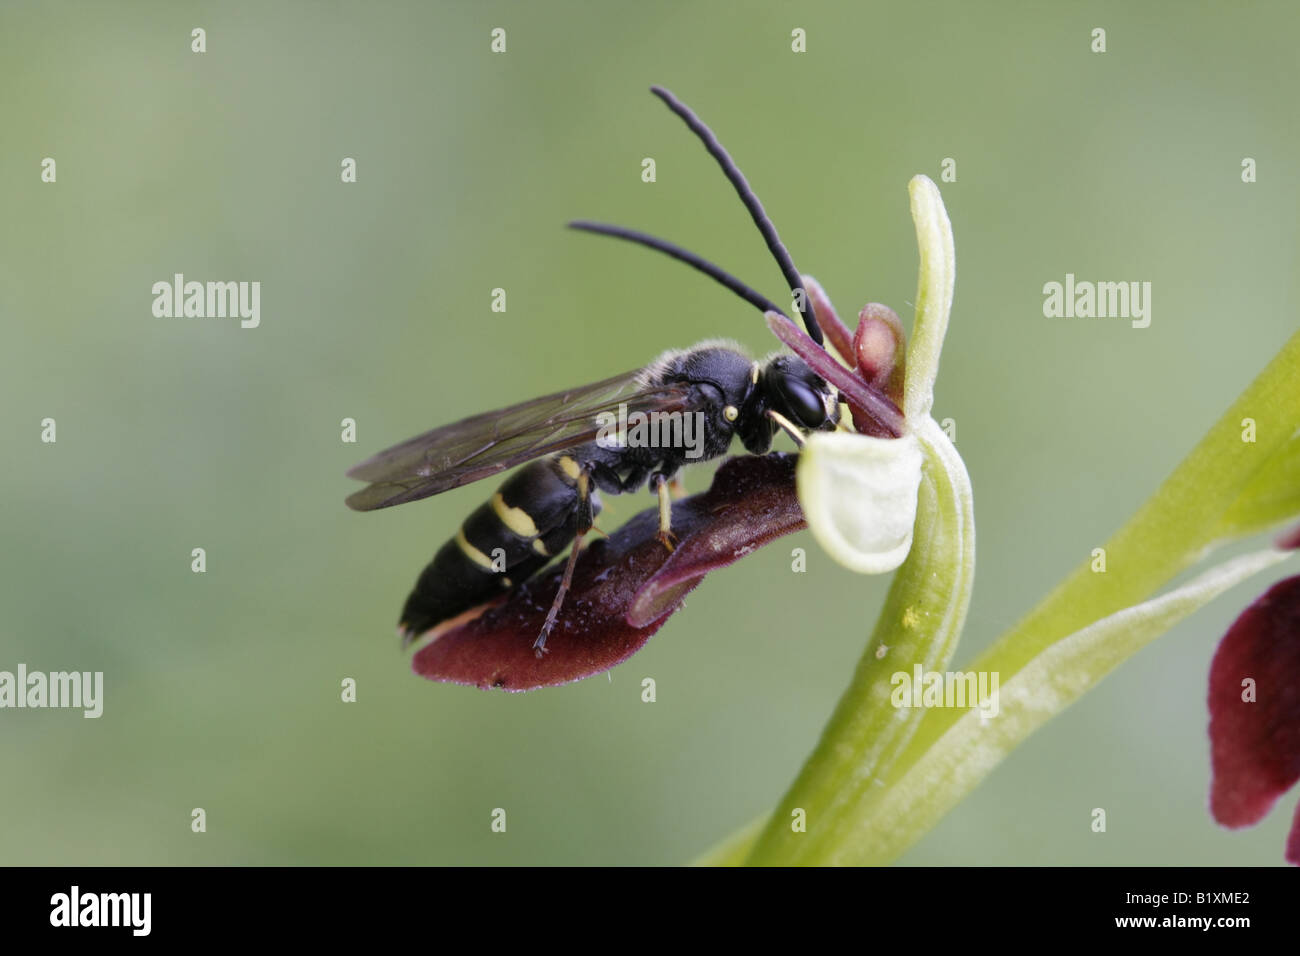 Solitary wasp, Argogorytes mystaceus, psuedocopulating on fly orchid, ophyrs insectifera Stock Photo